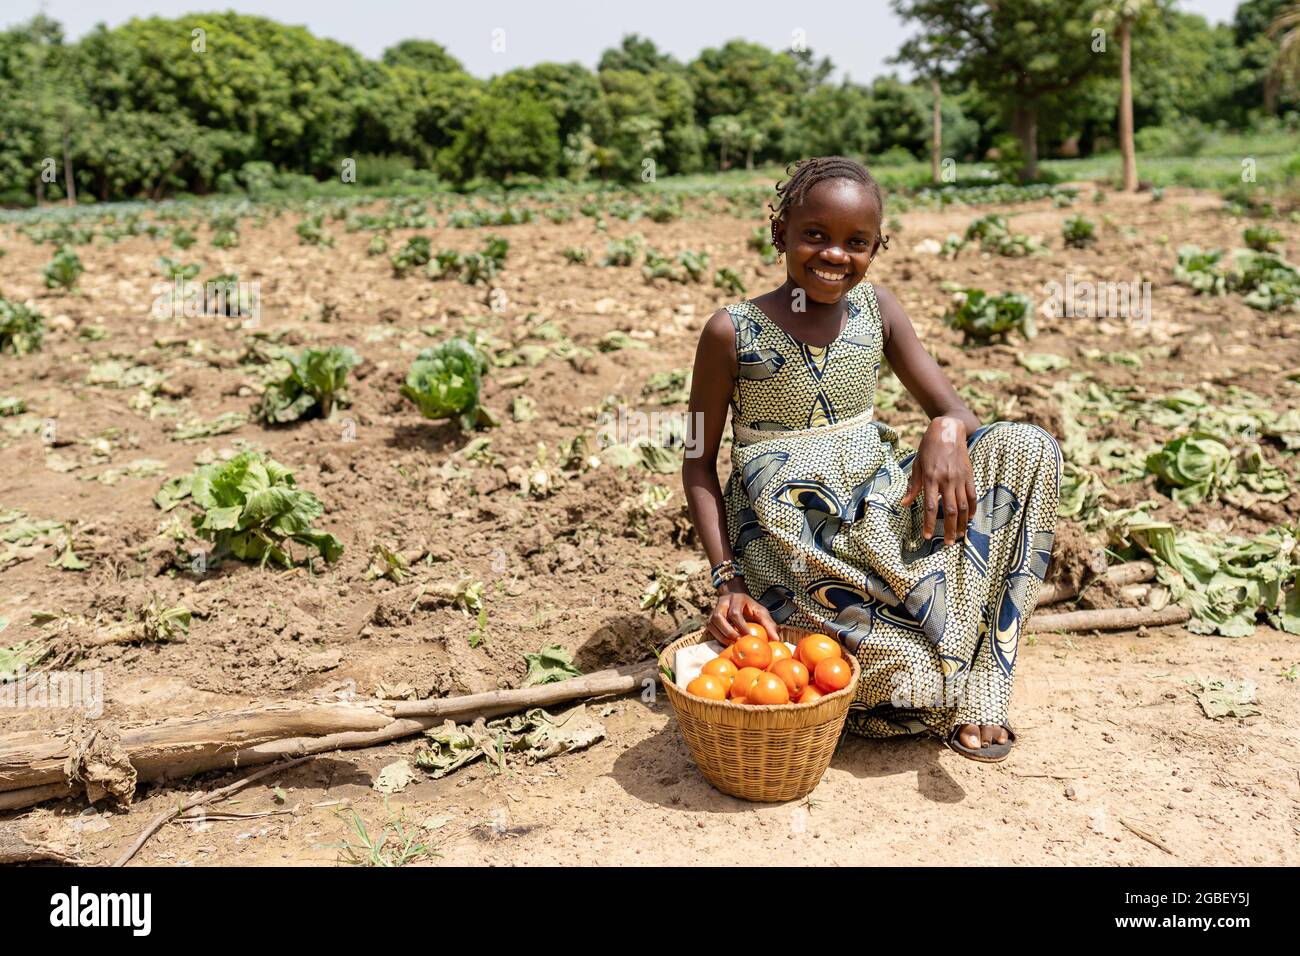 In this image, a smiling African girl is resting on the long way to the market under the hot sun, sitting on the border of a cabbage field with her fu Stock Photo